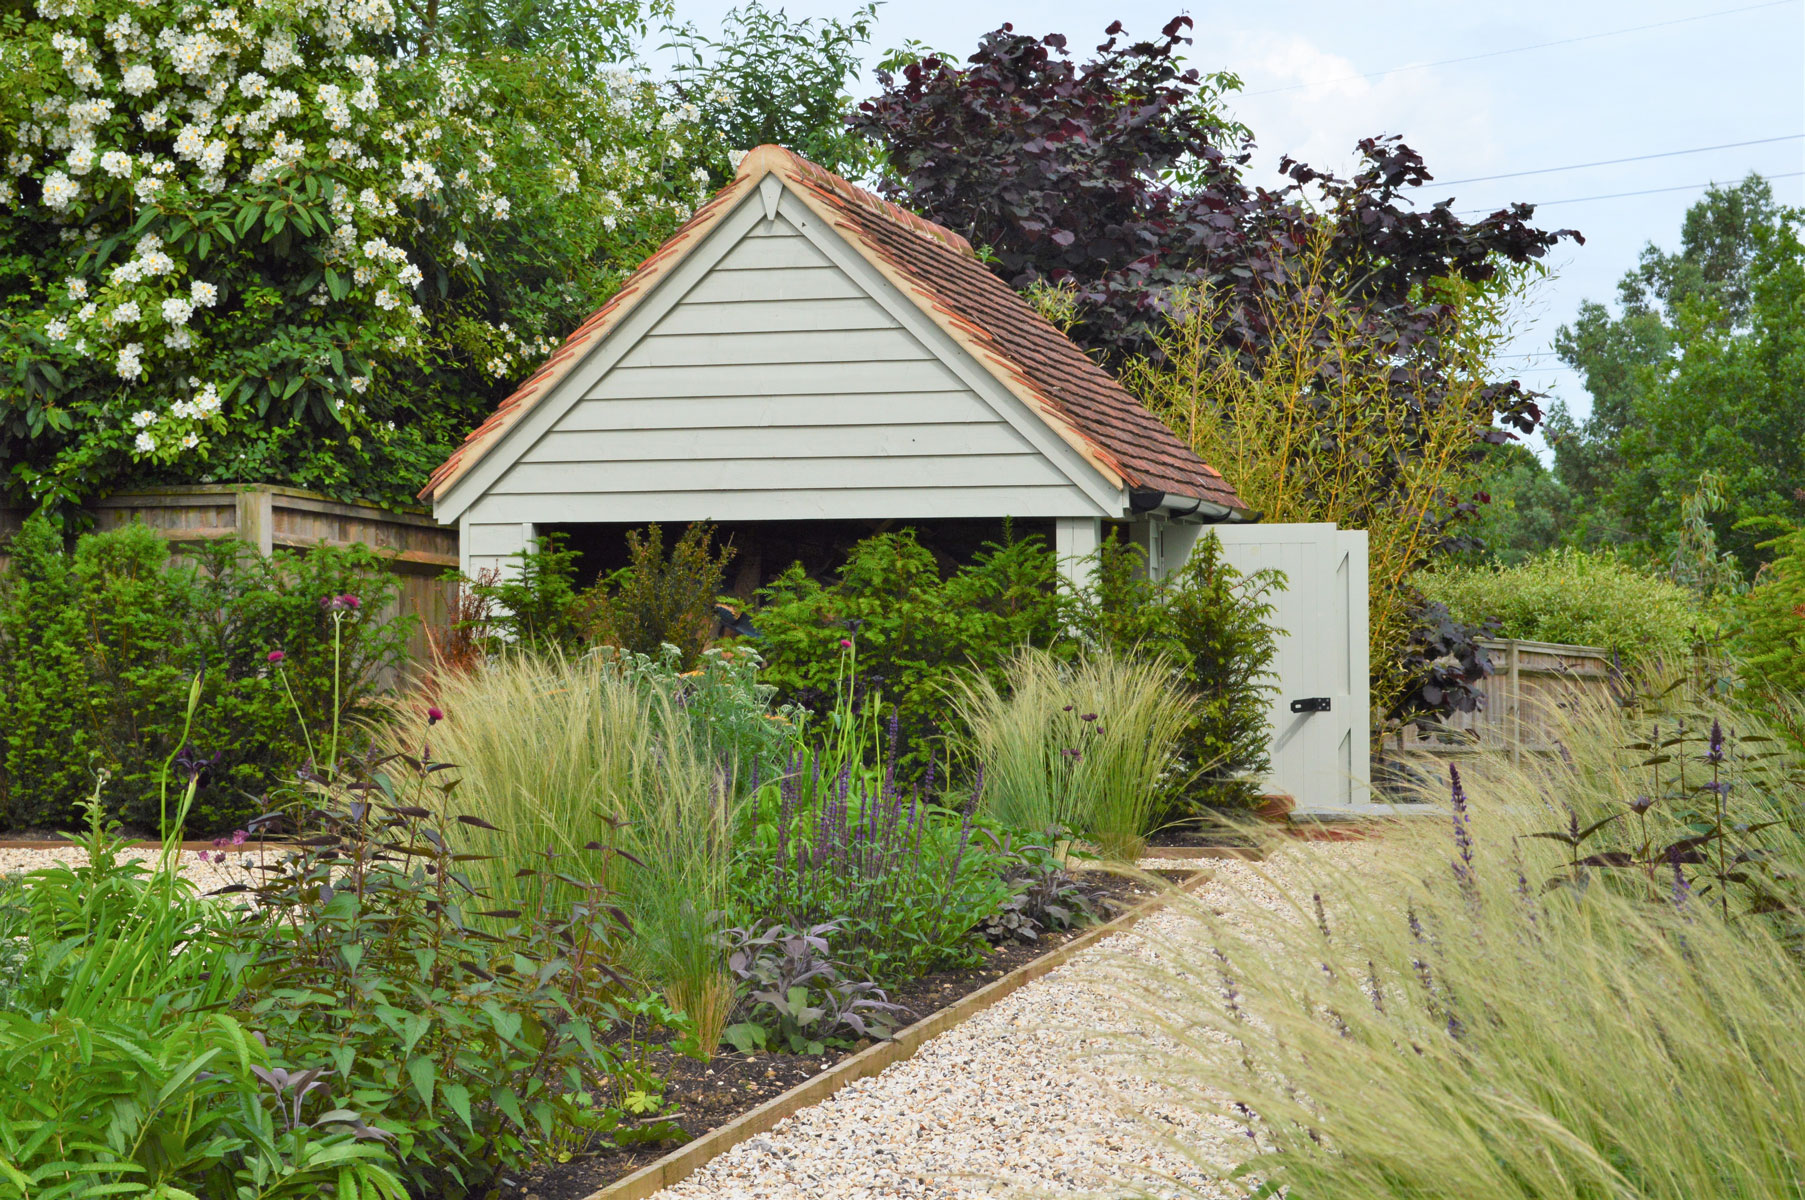 Garden design with outbuilding, planting with grasses mixed with perennials